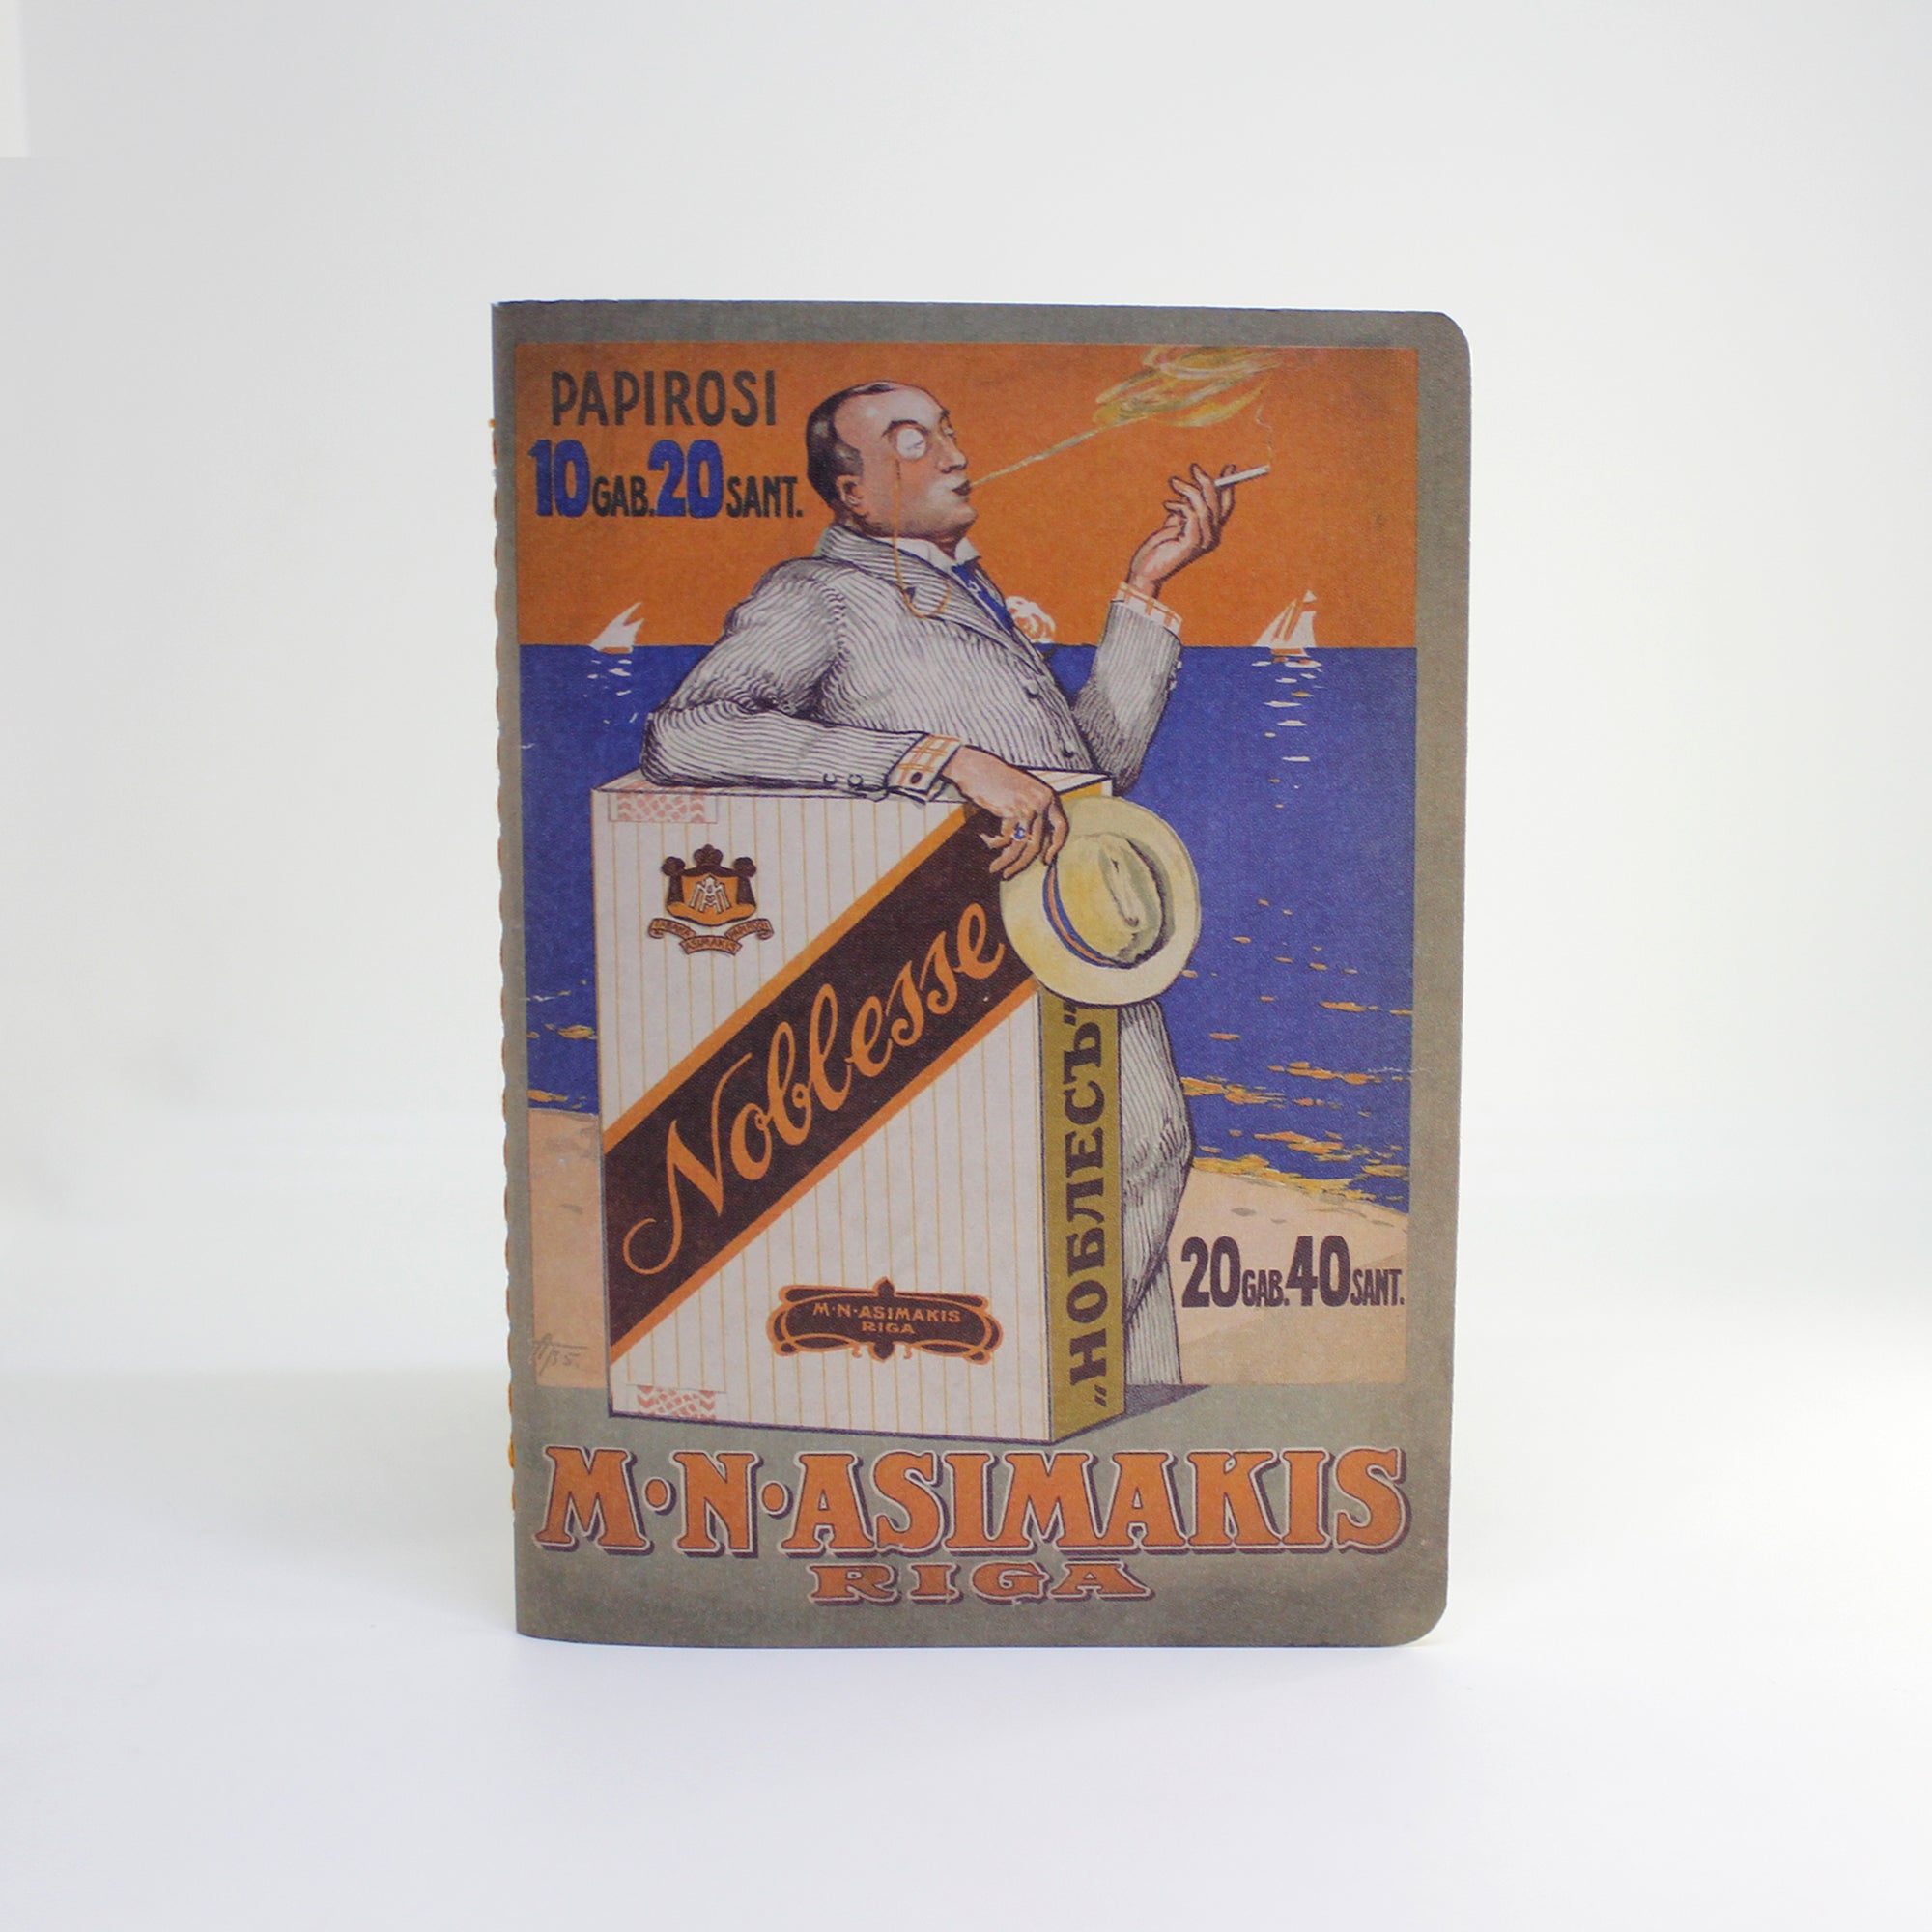 Small notebook - Advertisement for "Noblesse" cigarettes